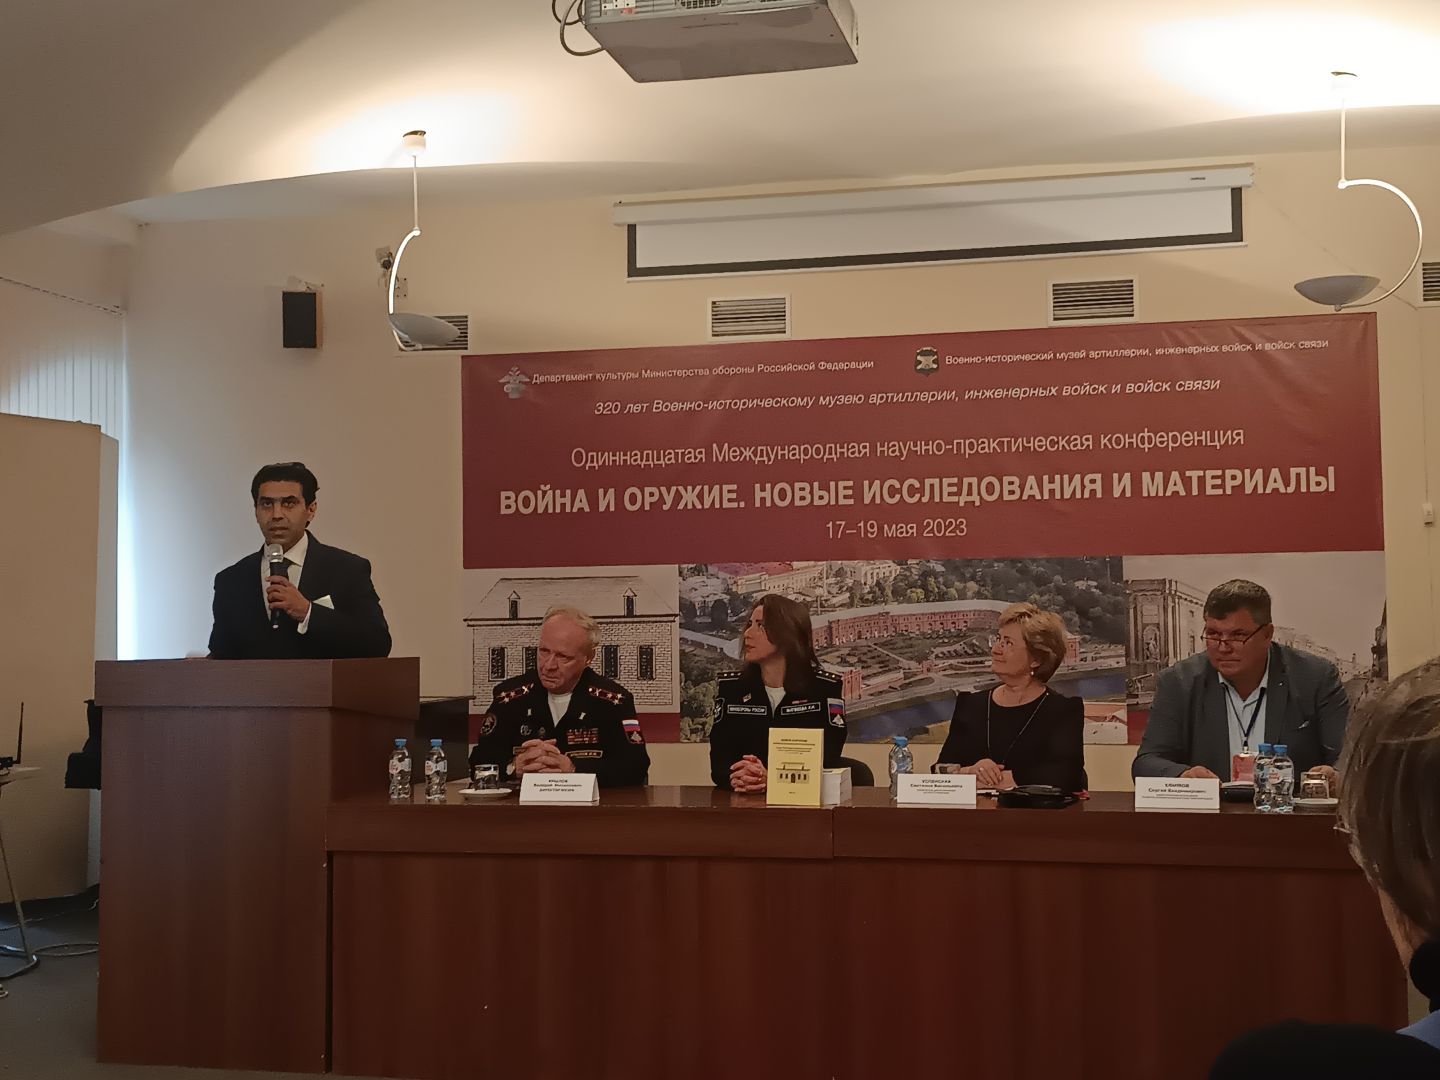 Azerbaijani scientist addresses international conference in St. Petersburg [PHOTOS] - Gallery Image